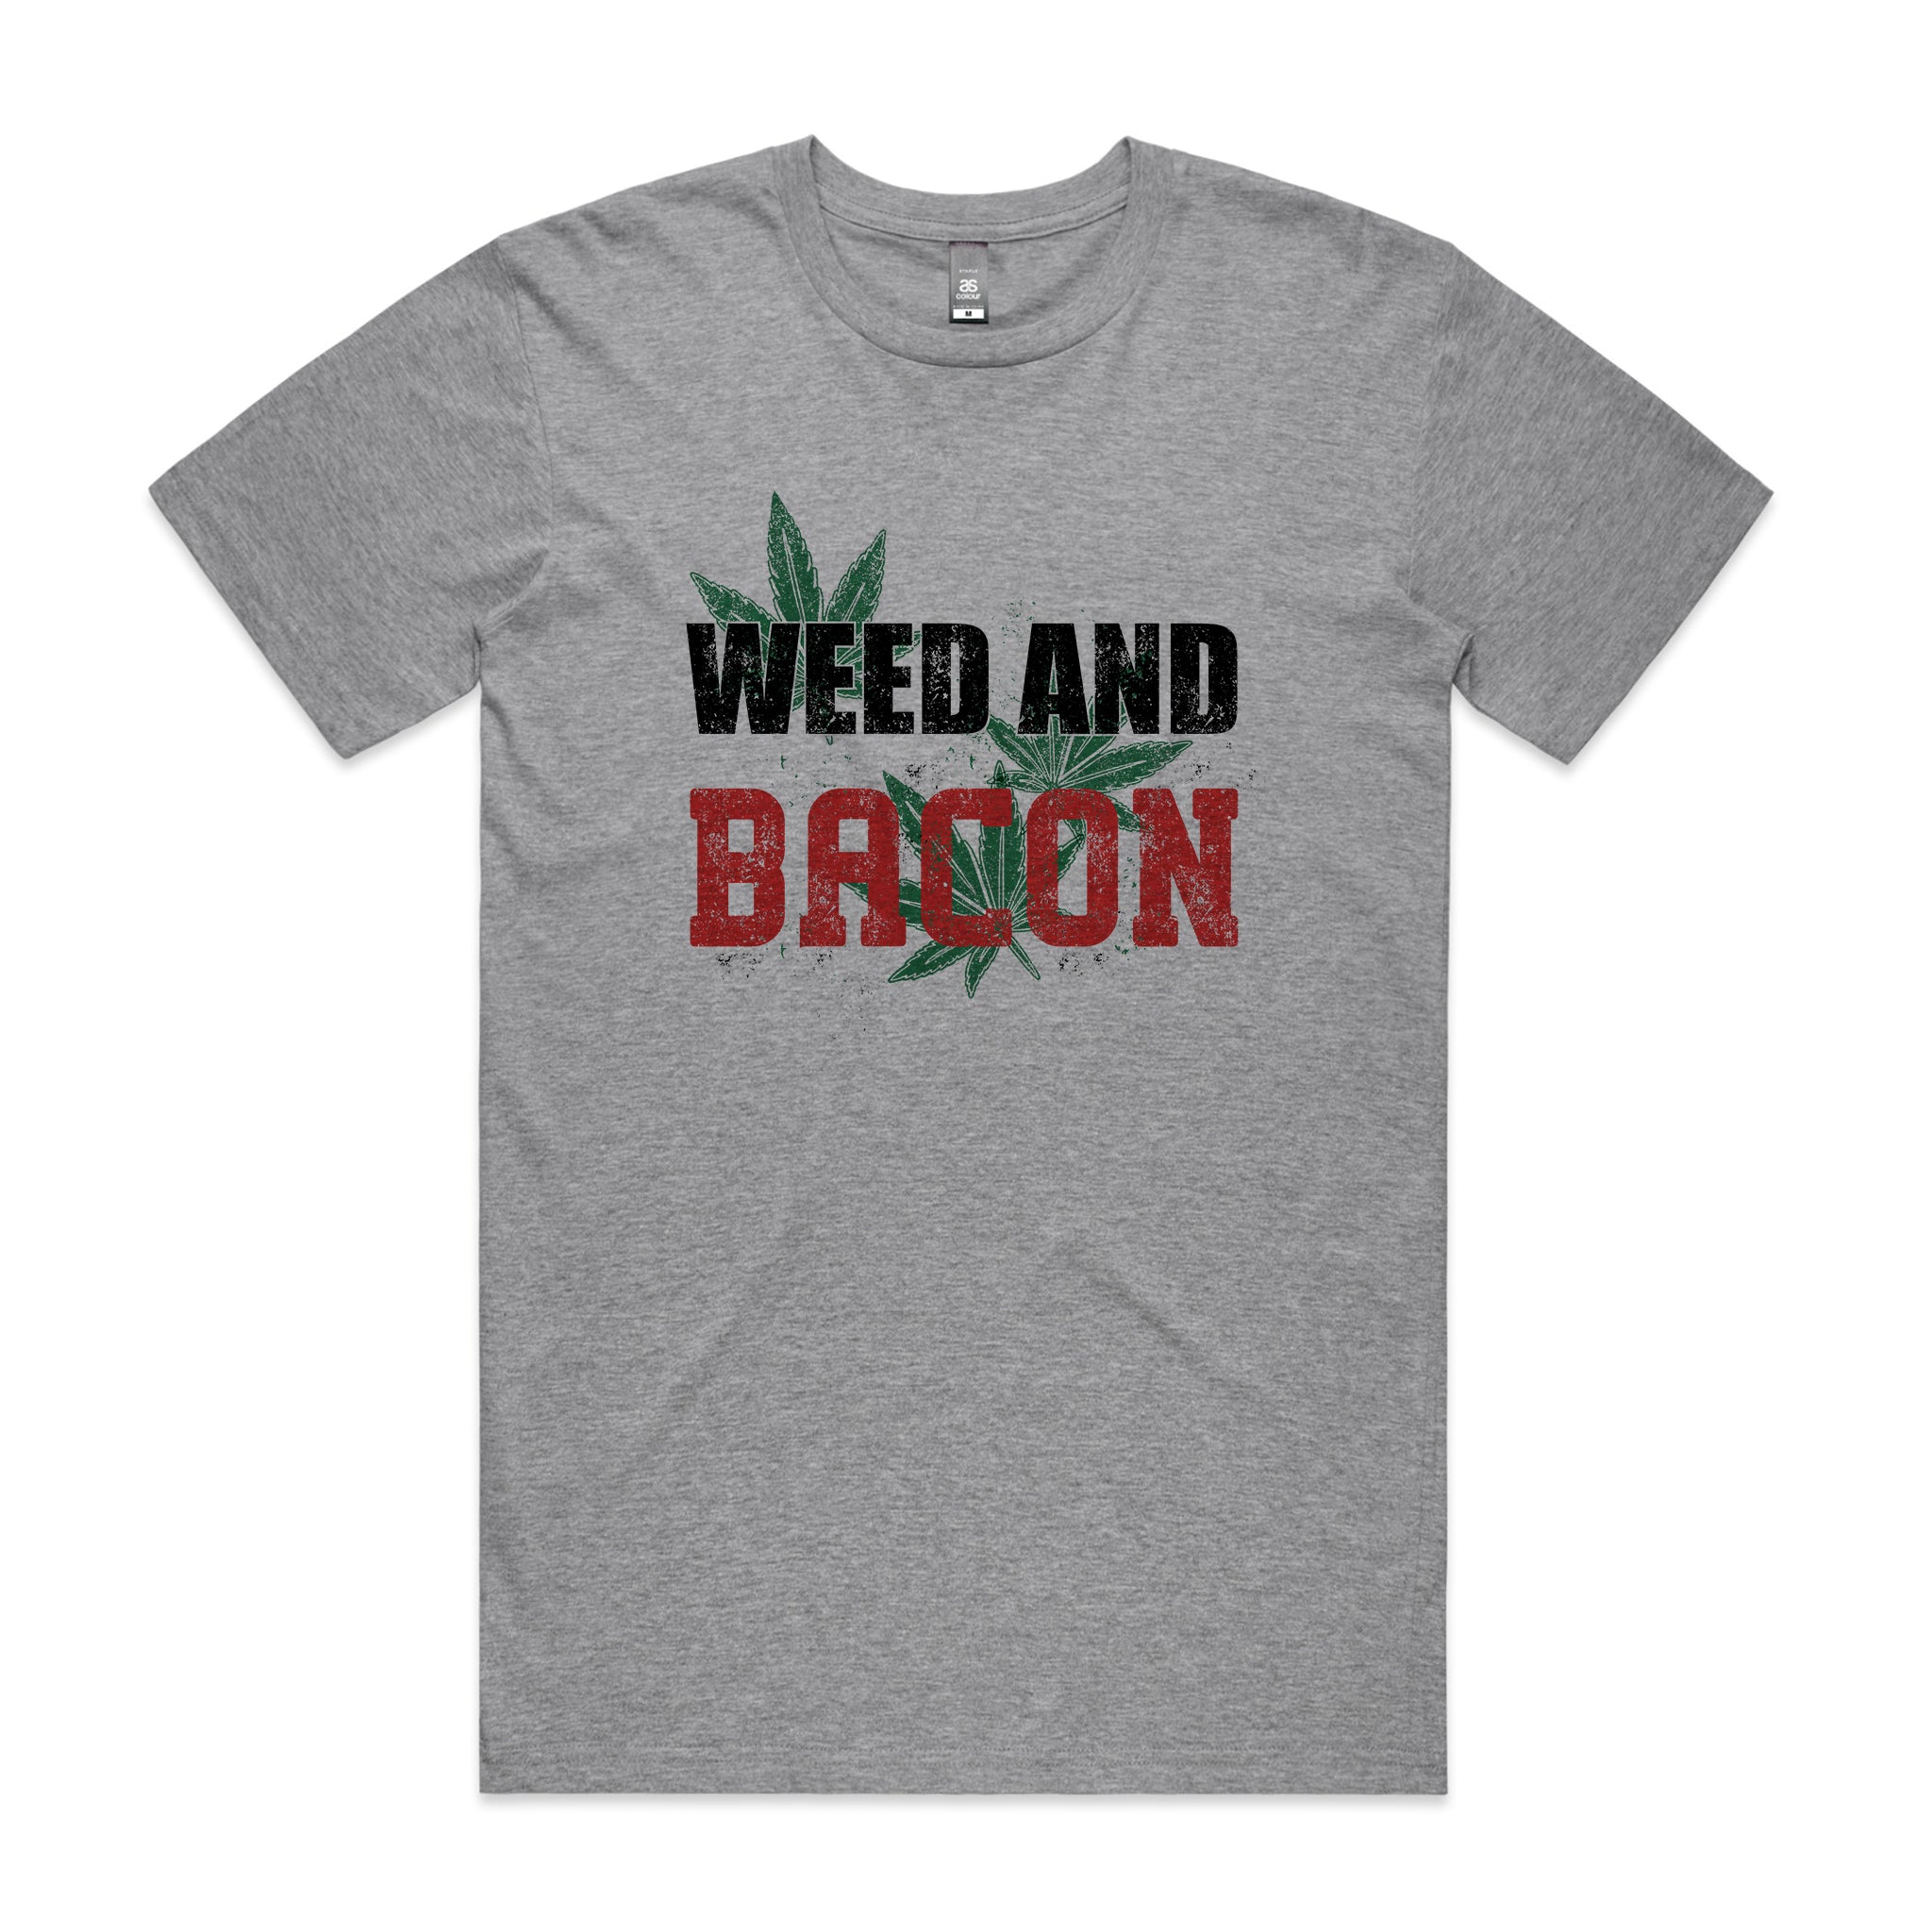 Weed And Bacon Tee